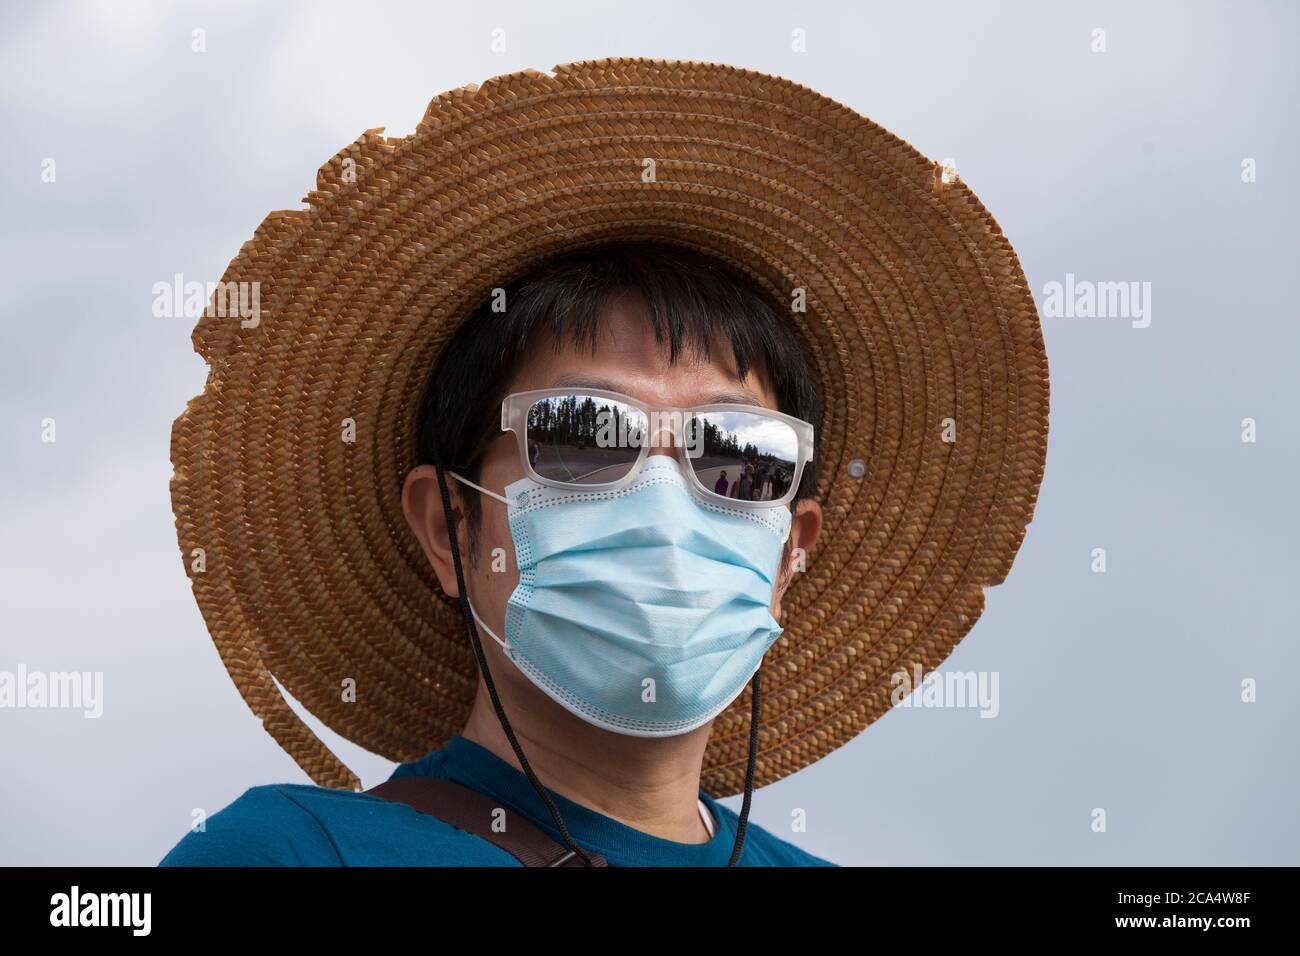 A visitor from South Korea wears a face mask while waiting for Old Faithful to erupt on Monday, August 3, 2020. The park recently reported several positive cases of the COVID-19 virus among visitors and concessioners. Stock Photo